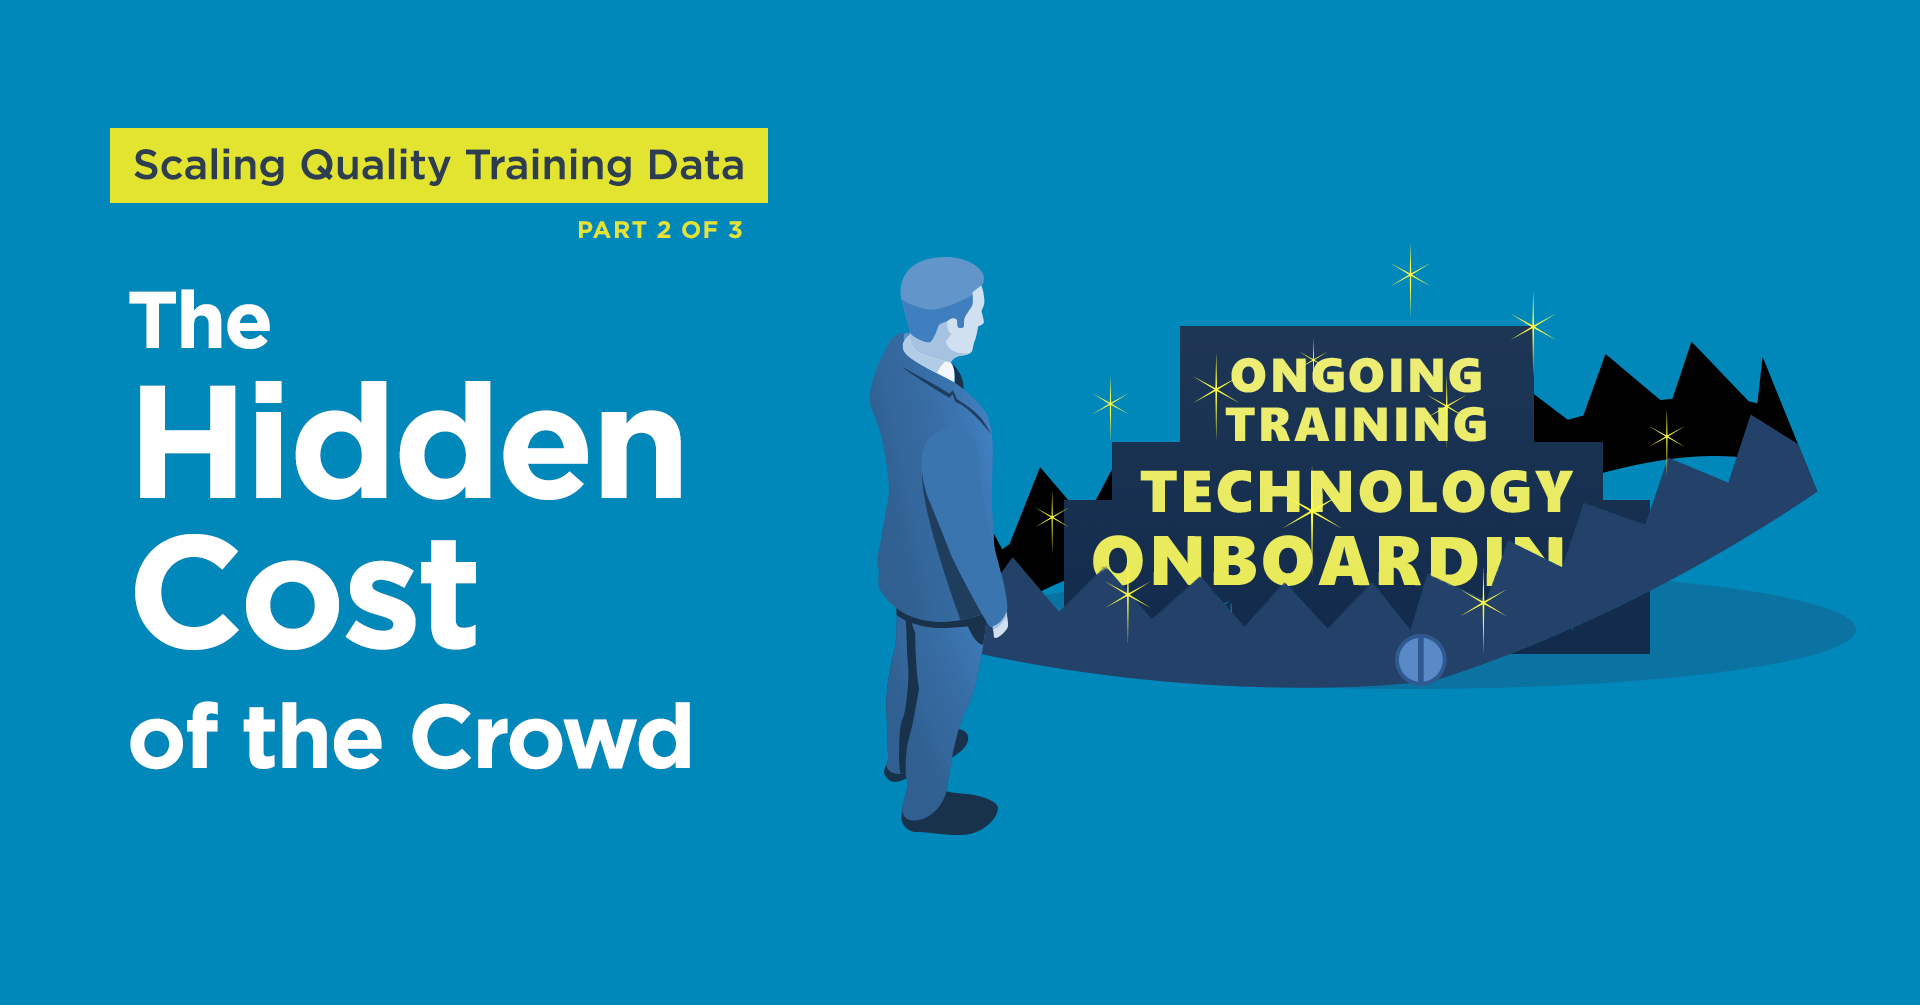 The Hidden Costs of Crowd is the second part in our 3 part series on Scaling Quality Training Data. In this image, a man looks at the trap that is crowdsourcing.